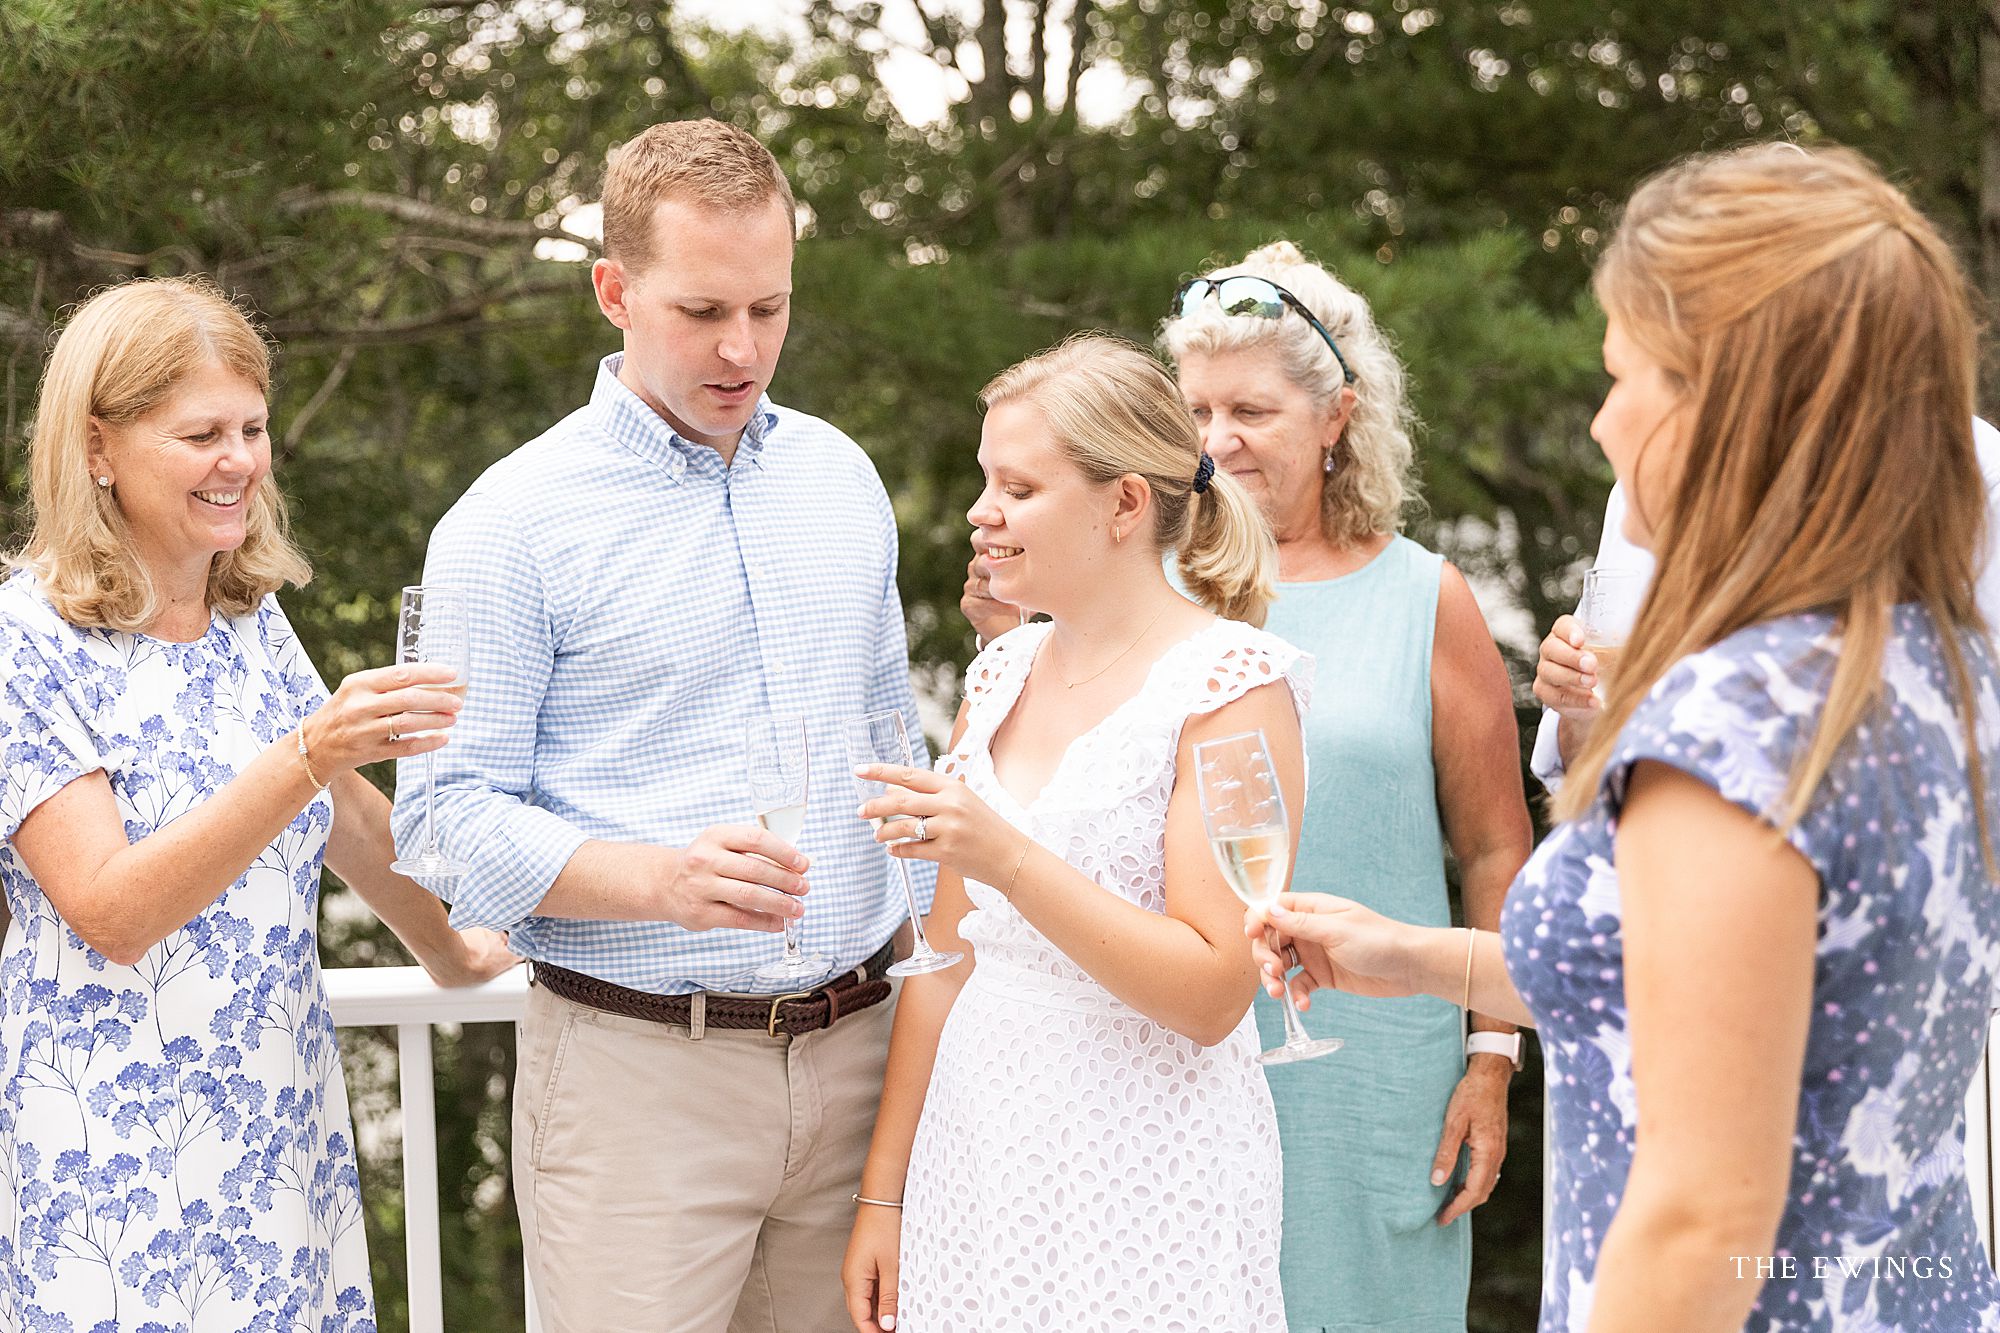 The best way to end an elopement micro wedding is with a clam bake! This 10 person wedding in Cotuit enjoyed lobsters and steamers at their intimate backyard wedding.